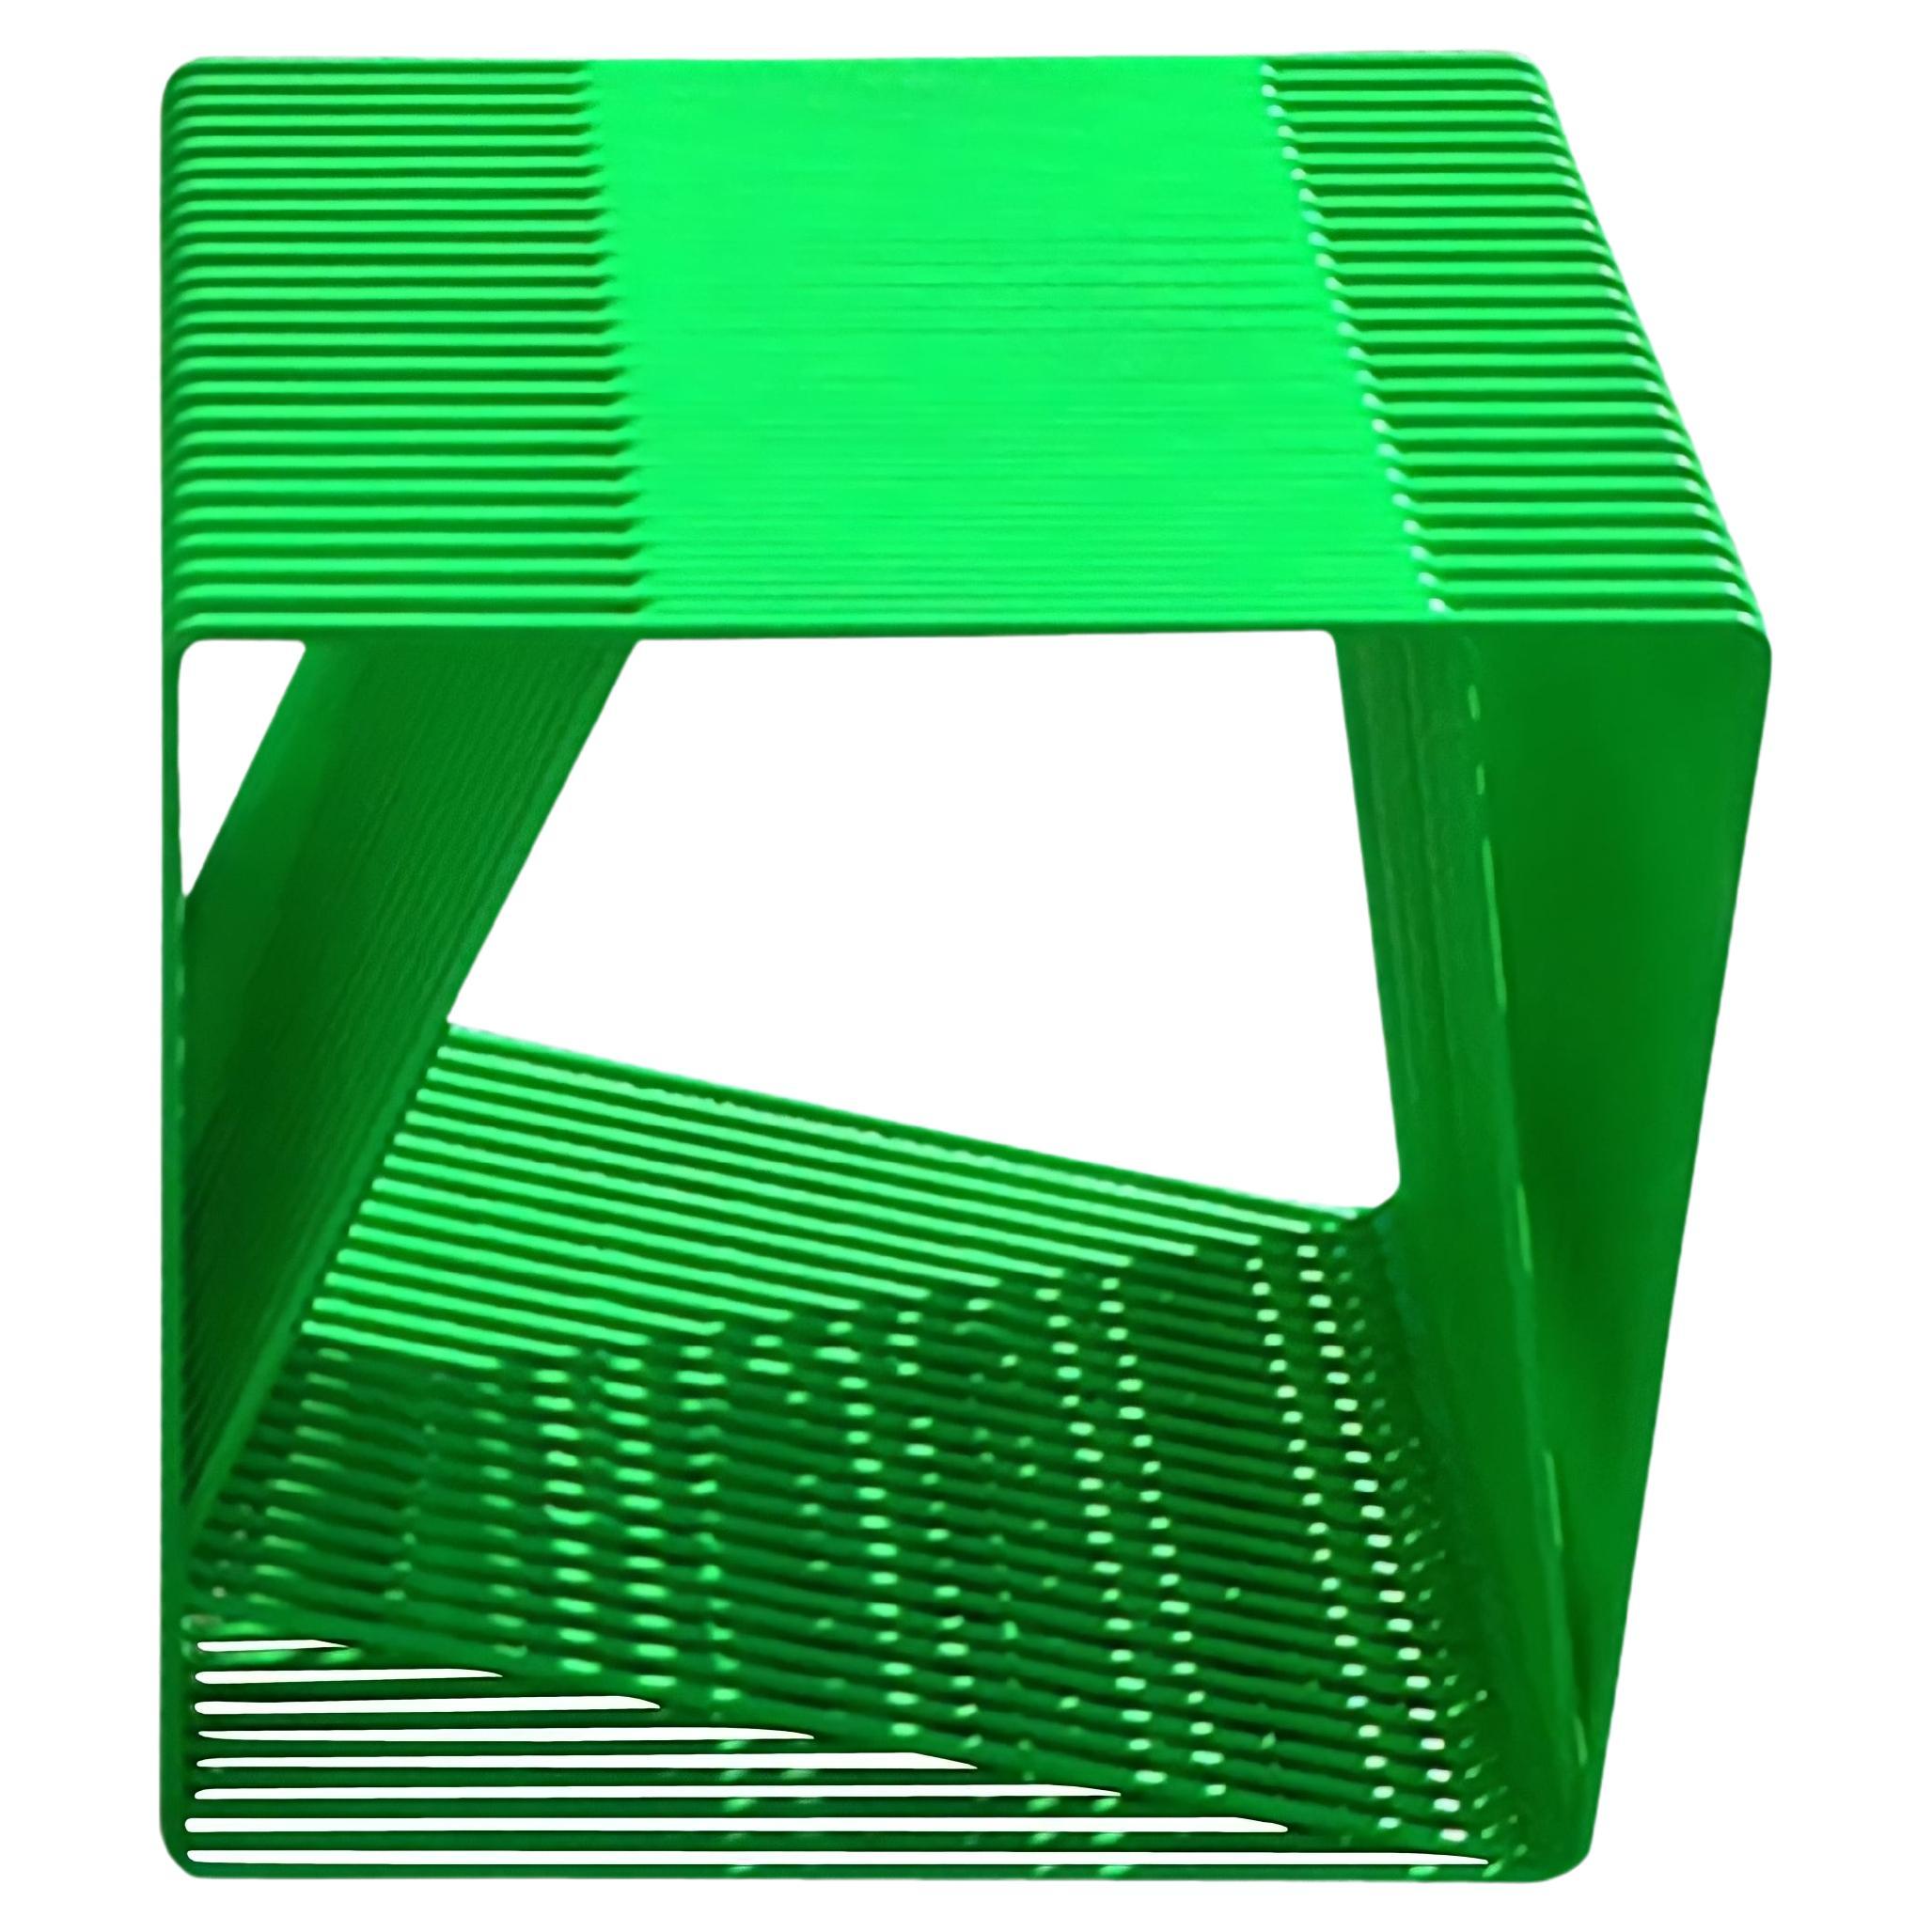 LOOP - Contemporary Minimal Geometric Steel Rod Side Table by TJOKEEFE For Sale